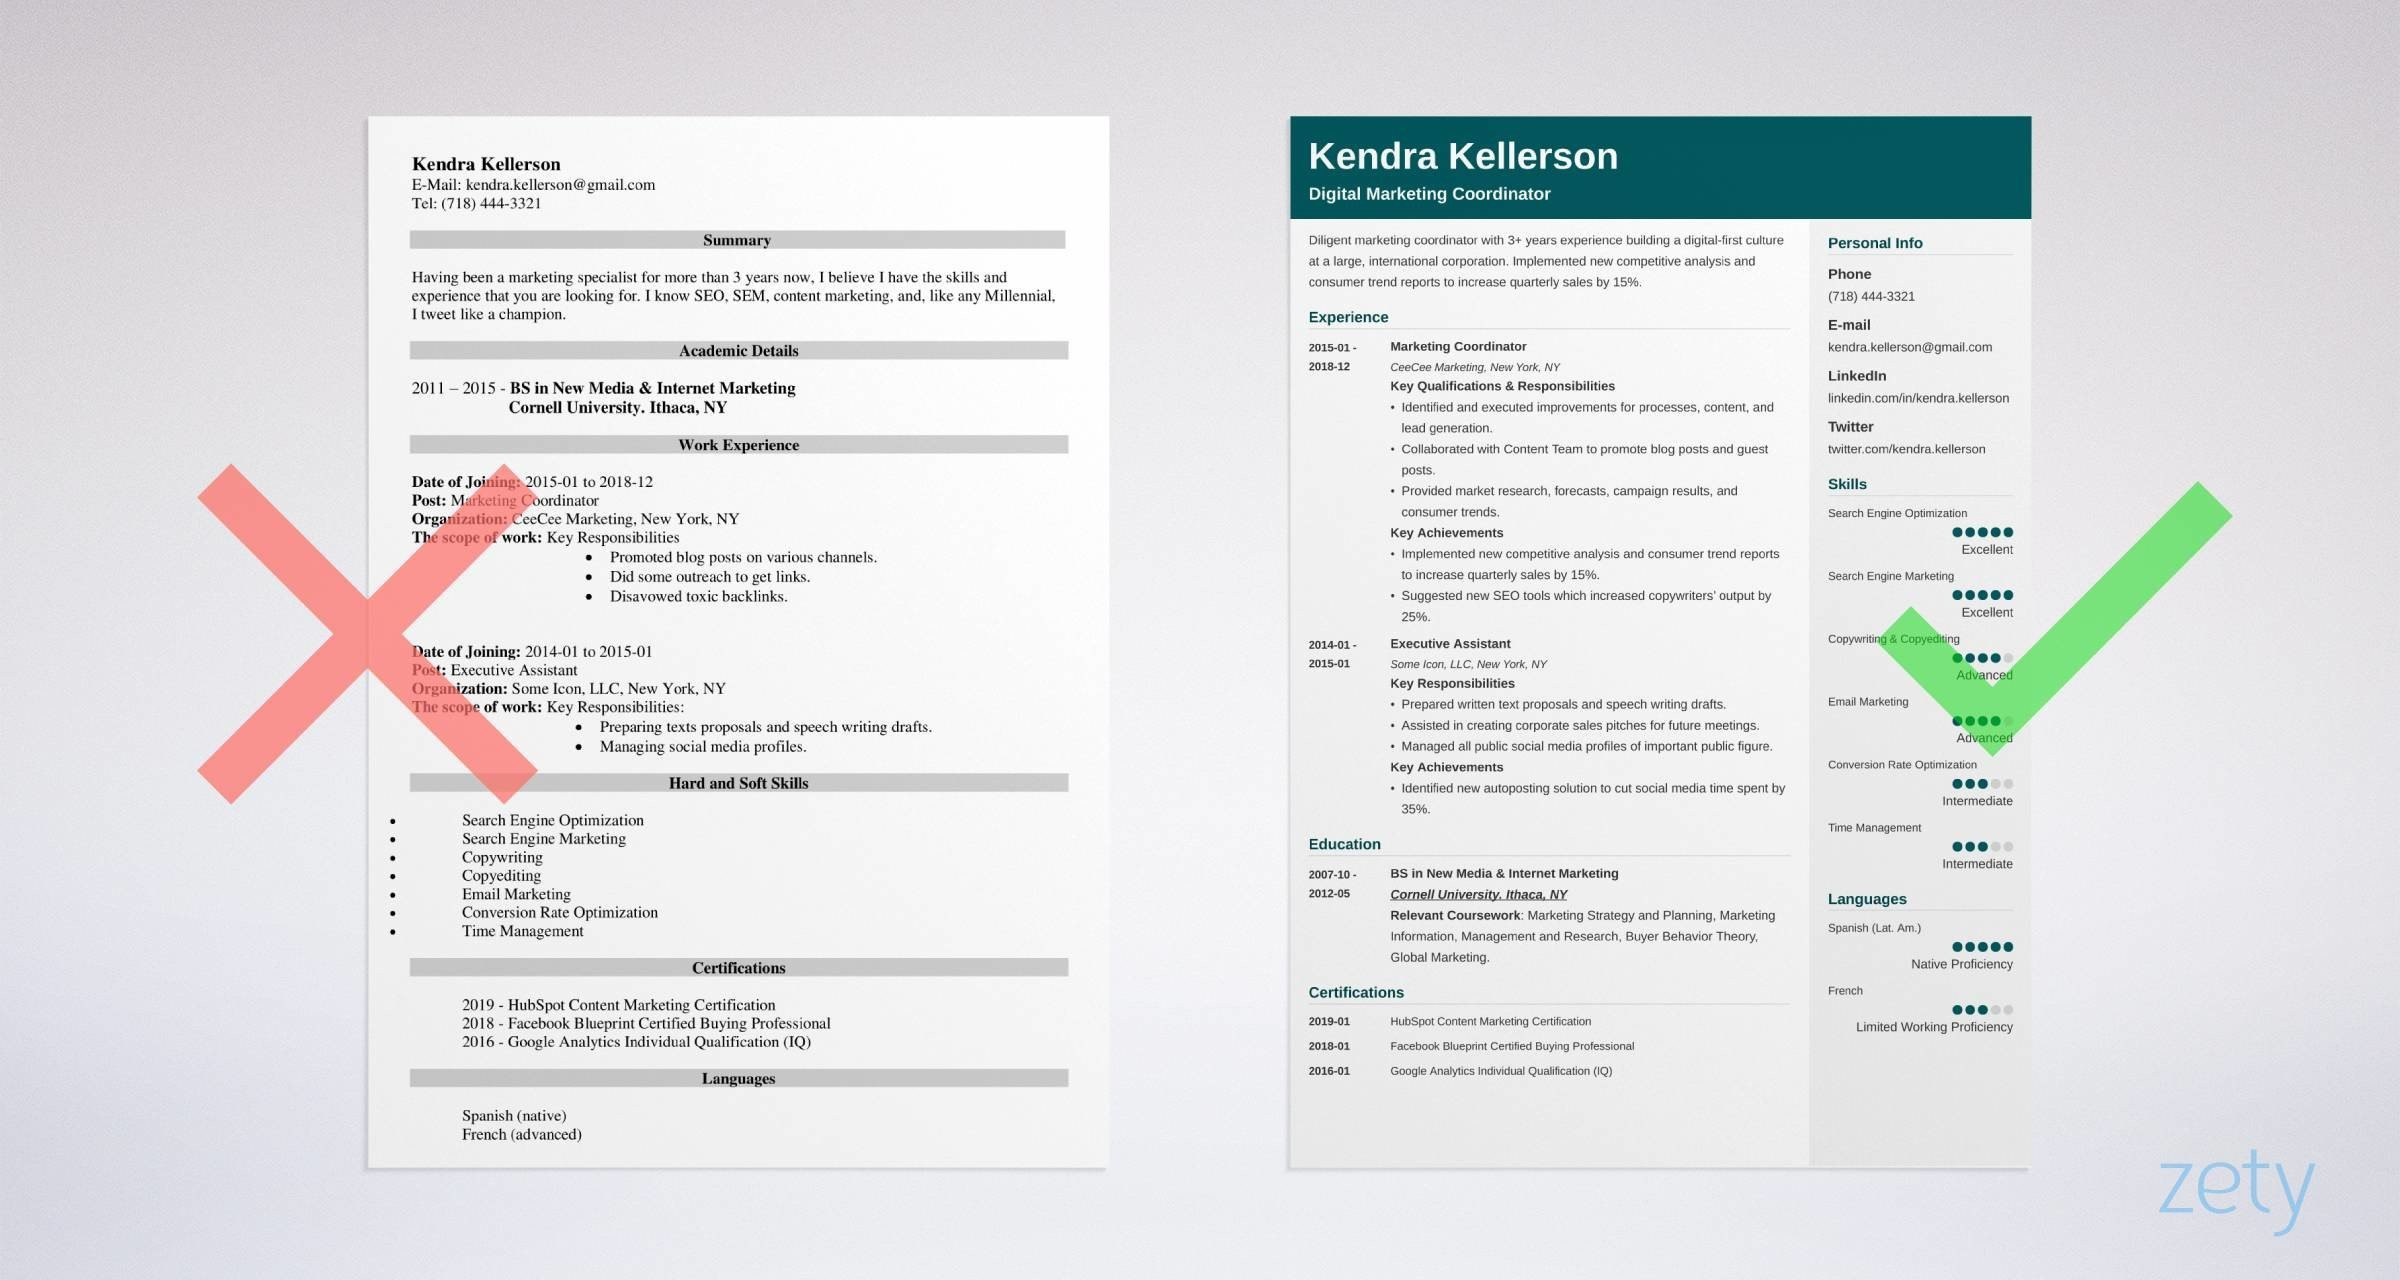 Software Marketing Manager Functional Resume Sample Digital Marketing Resume Examples (guide & Best Templates)